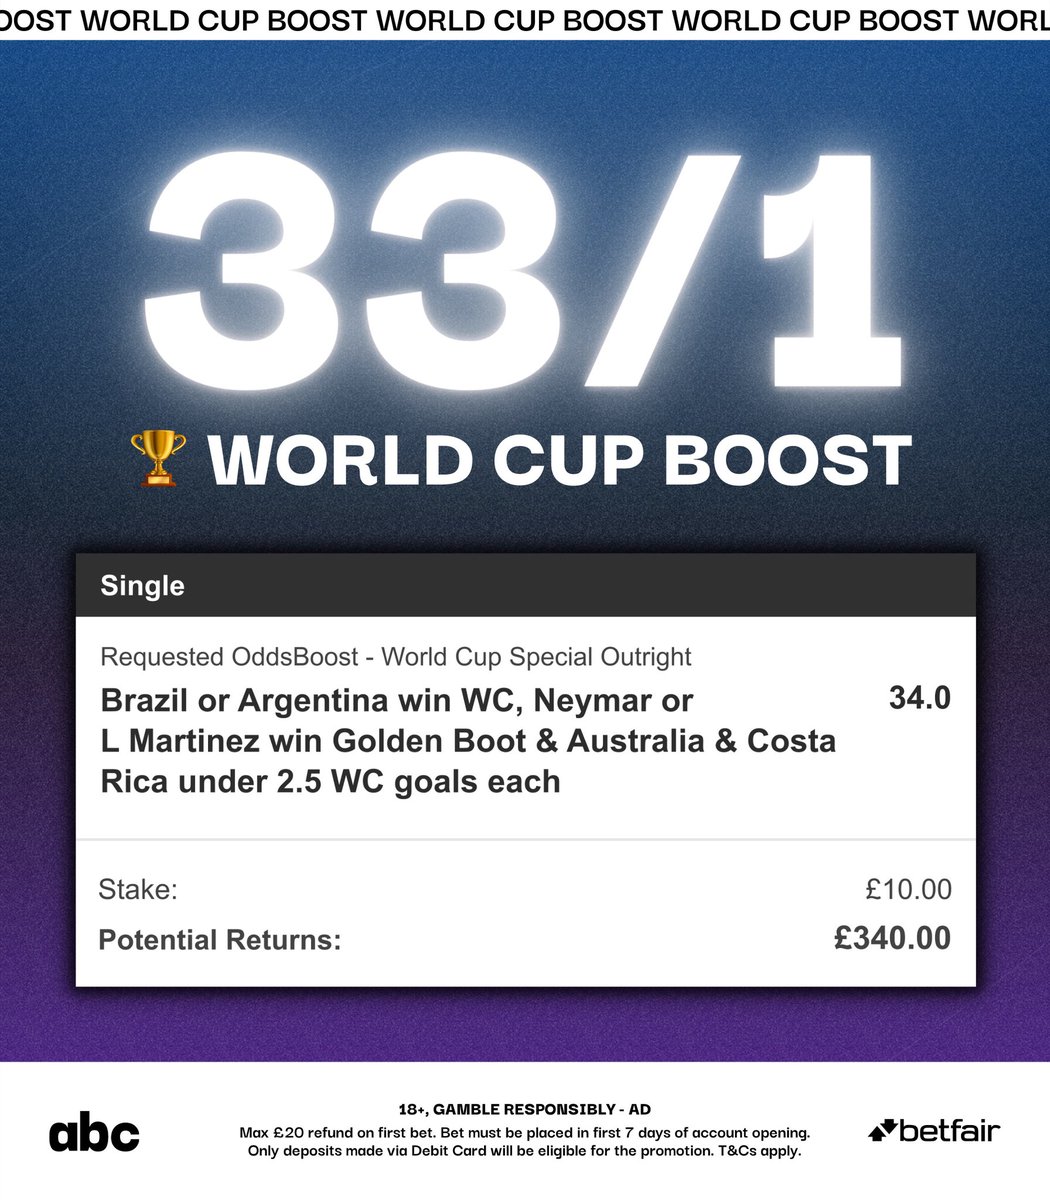 🏆 33/1 World Cup Boost Load bet: bit.ly/WC-BOOST This boost is exclusive to Betfair, get your stake instantly refunded in cash if it loses here: bit.ly/ABC20MoneyBack 🕵🏻‍♂️ Scout research in replies. 18+ Ad, Gamble Responsibly, T&Cs Apply